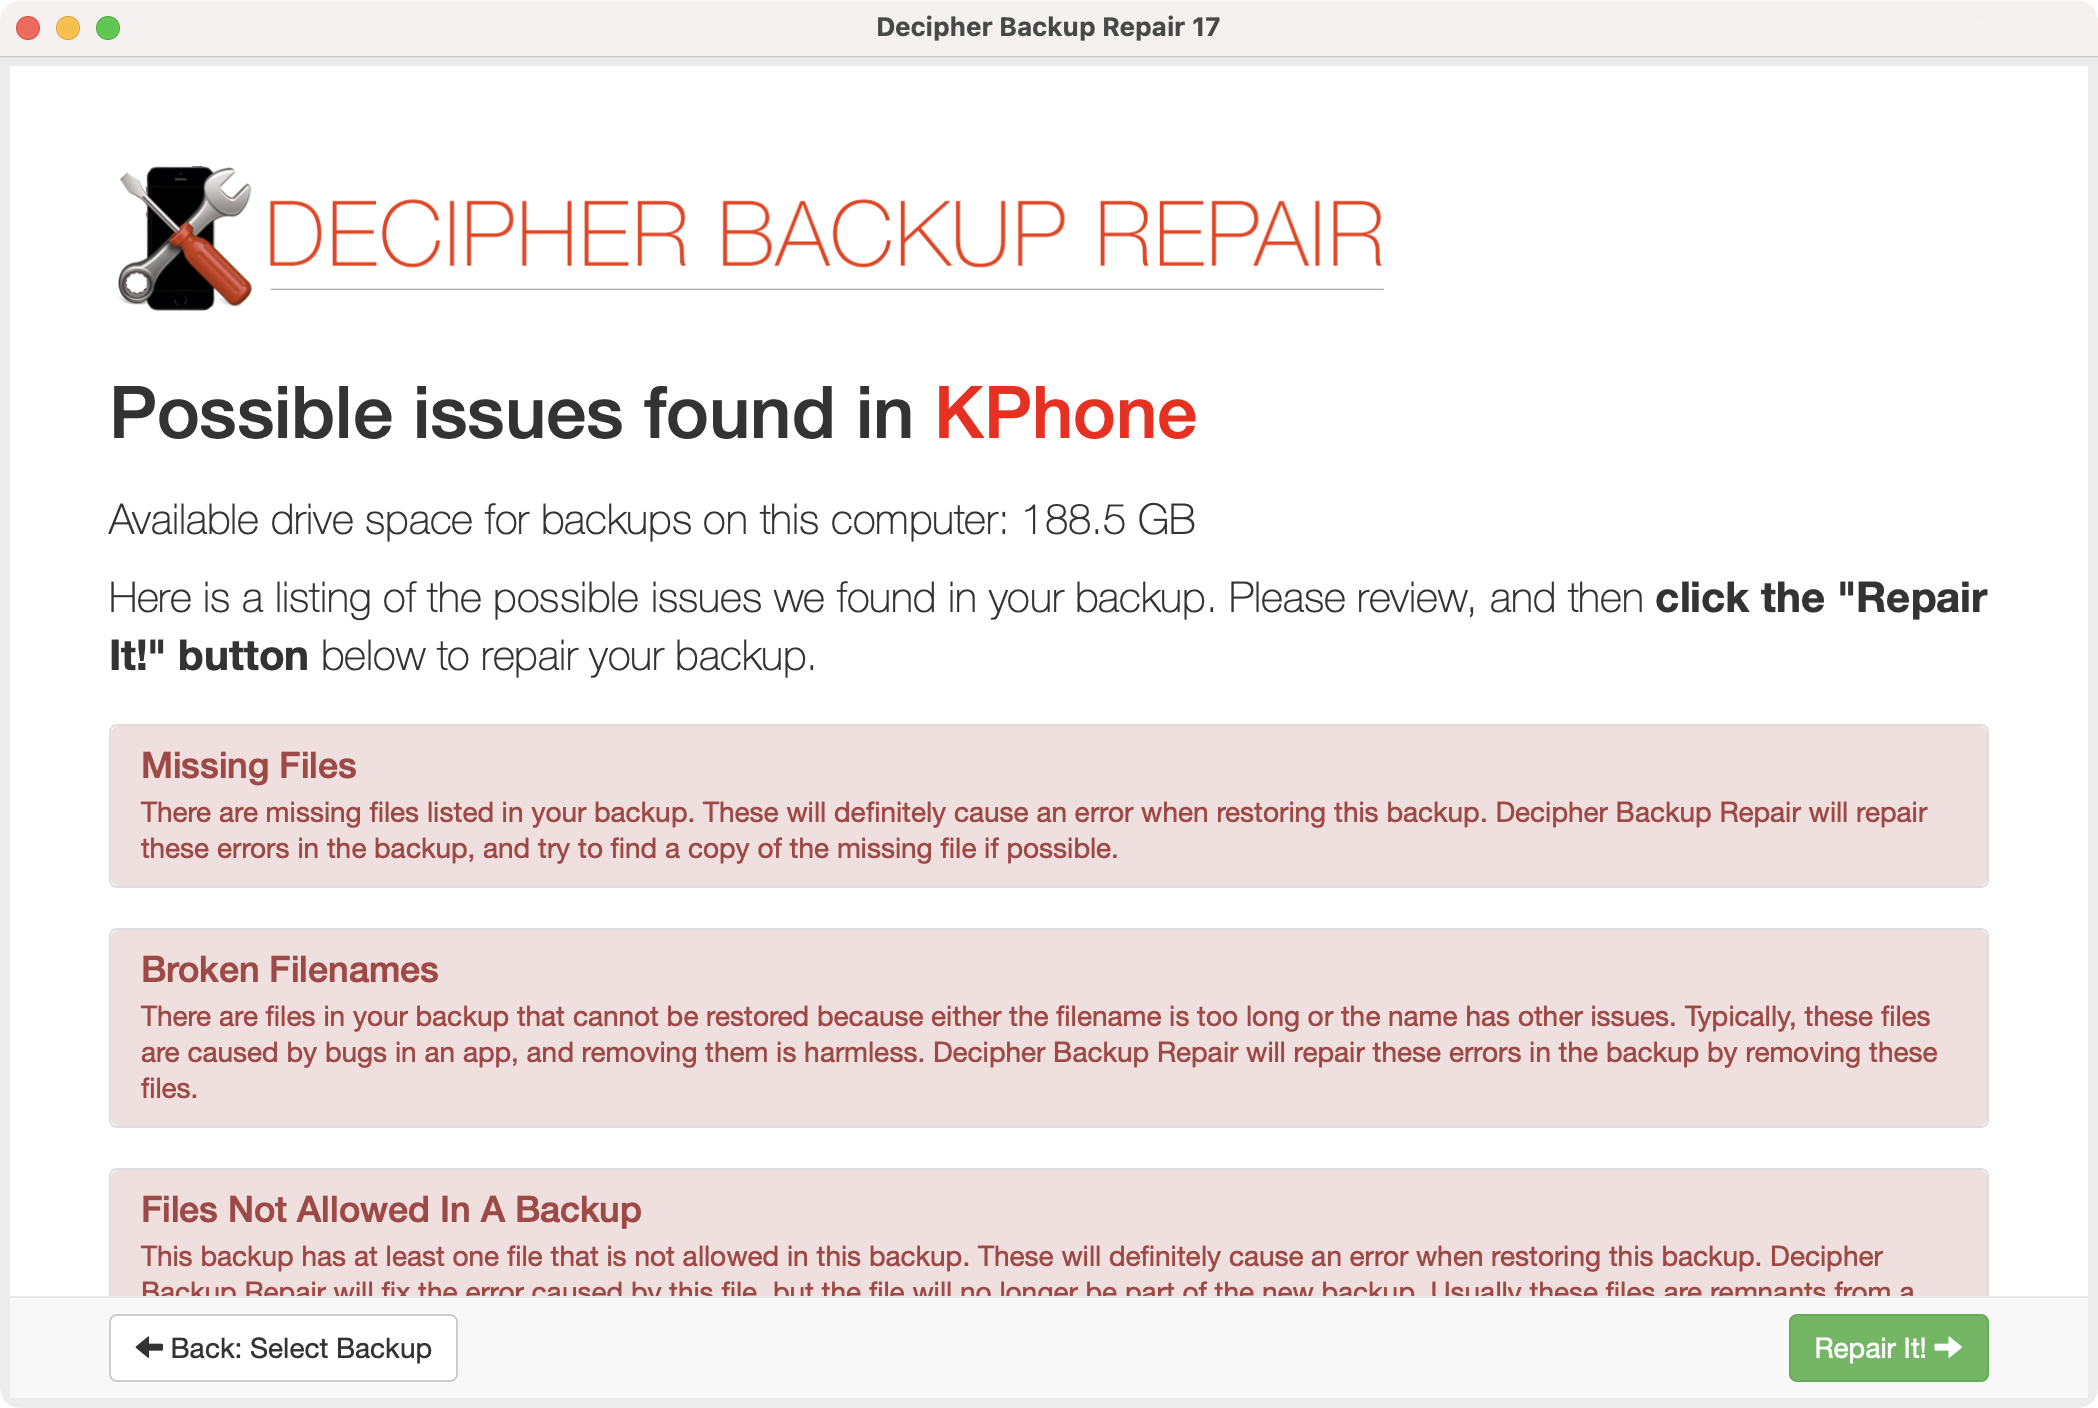 Decipher Backup Repair Preview errors found in the iOS backup before fixing them.